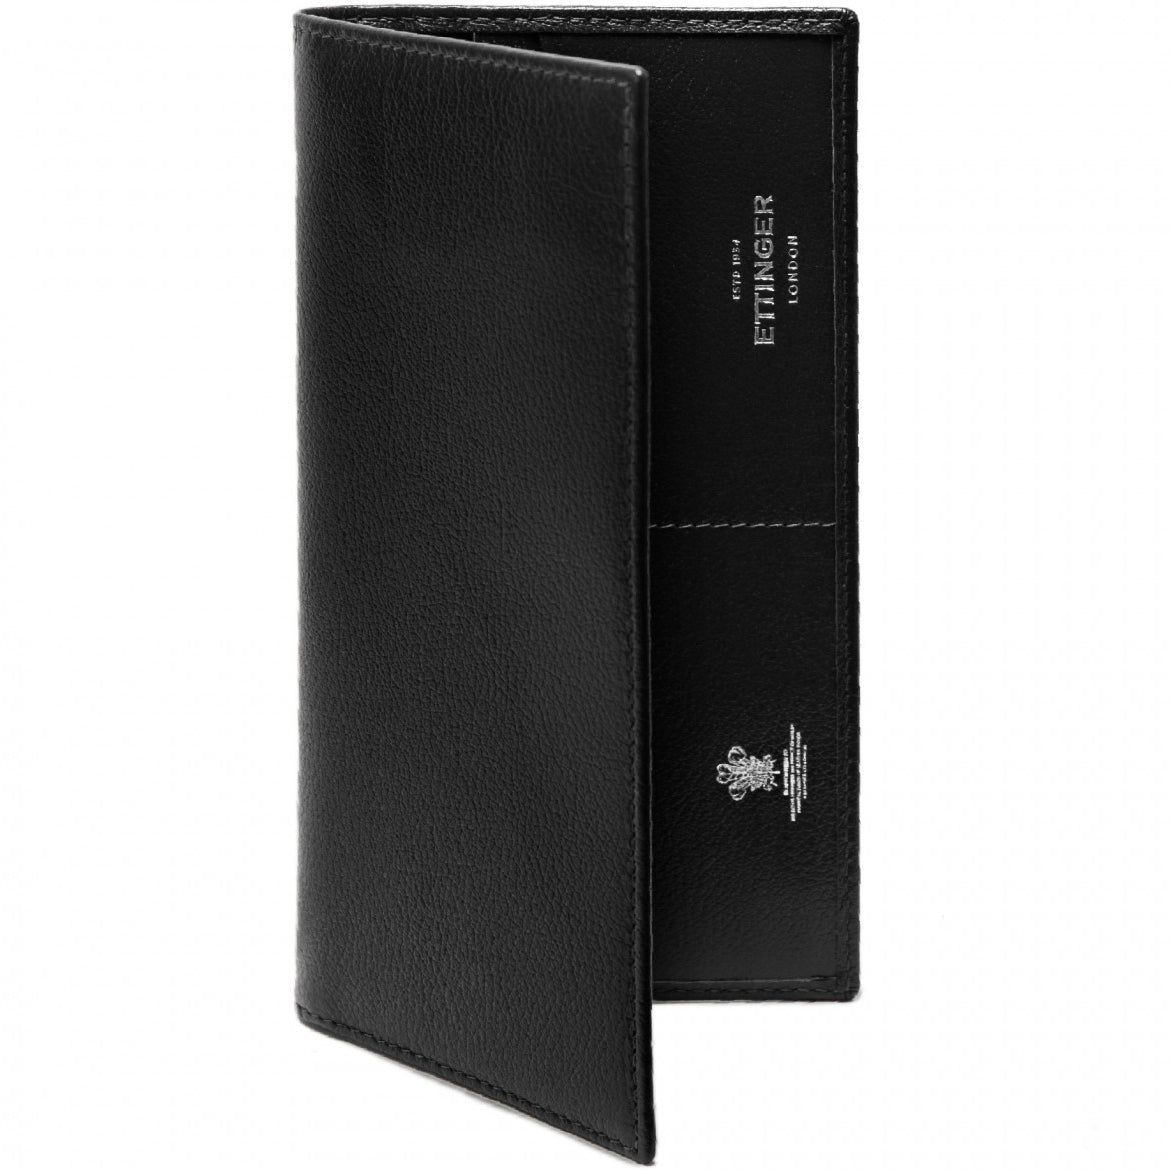 Ettinger Capra Long Wallet with Zippered Pocket Black made of Goat Leather